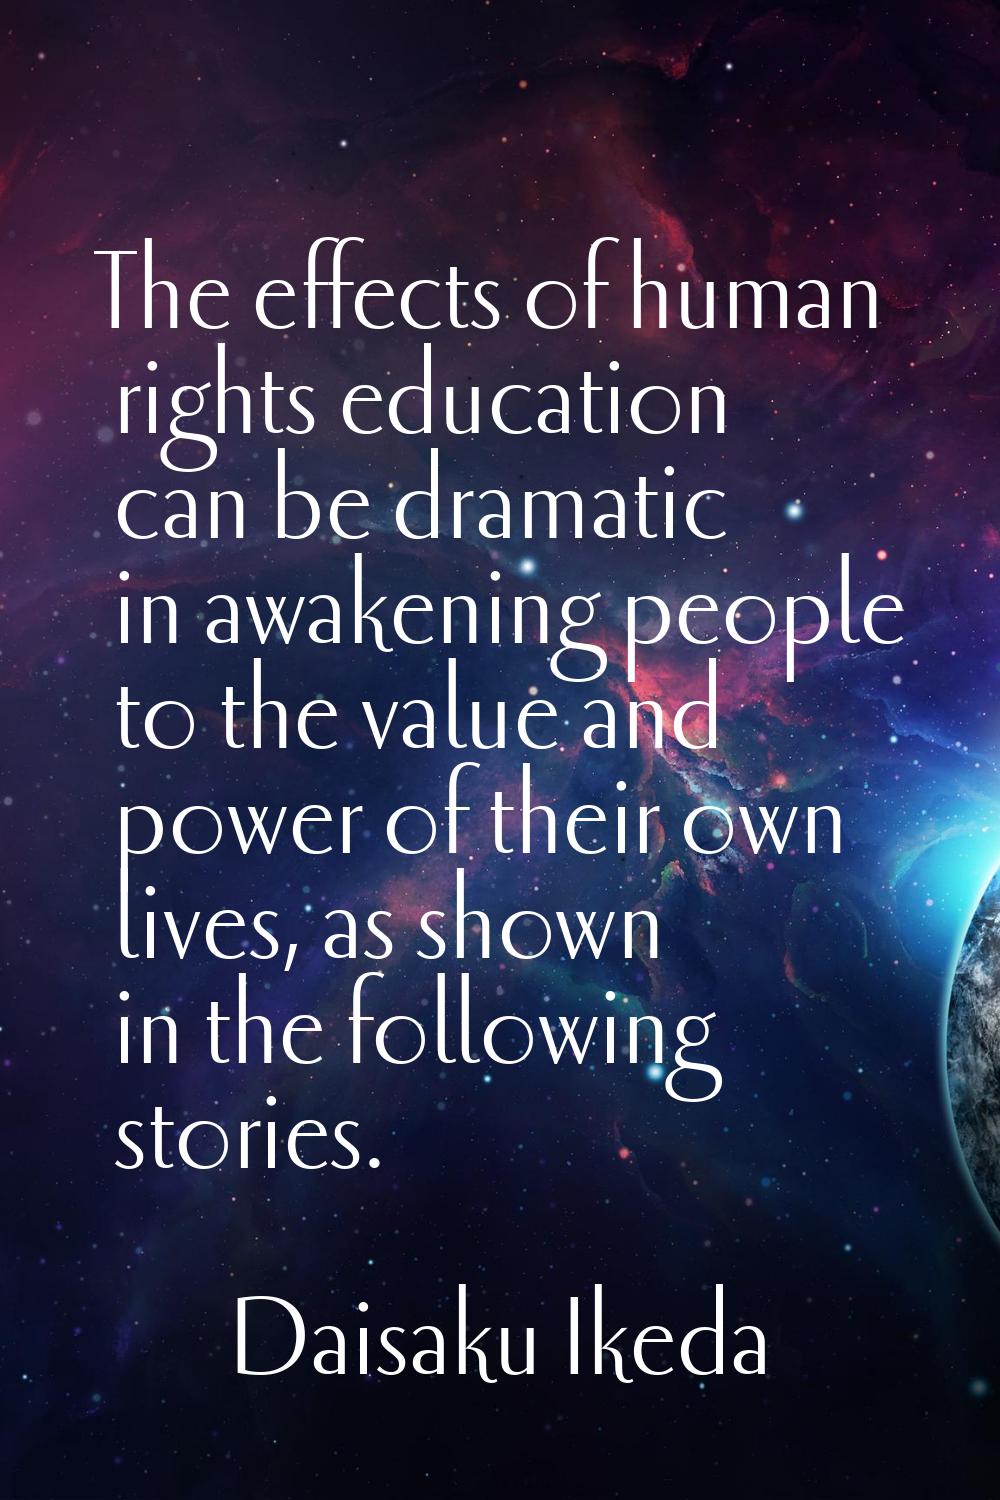 The effects of human rights education can be dramatic in awakening people to the value and power of